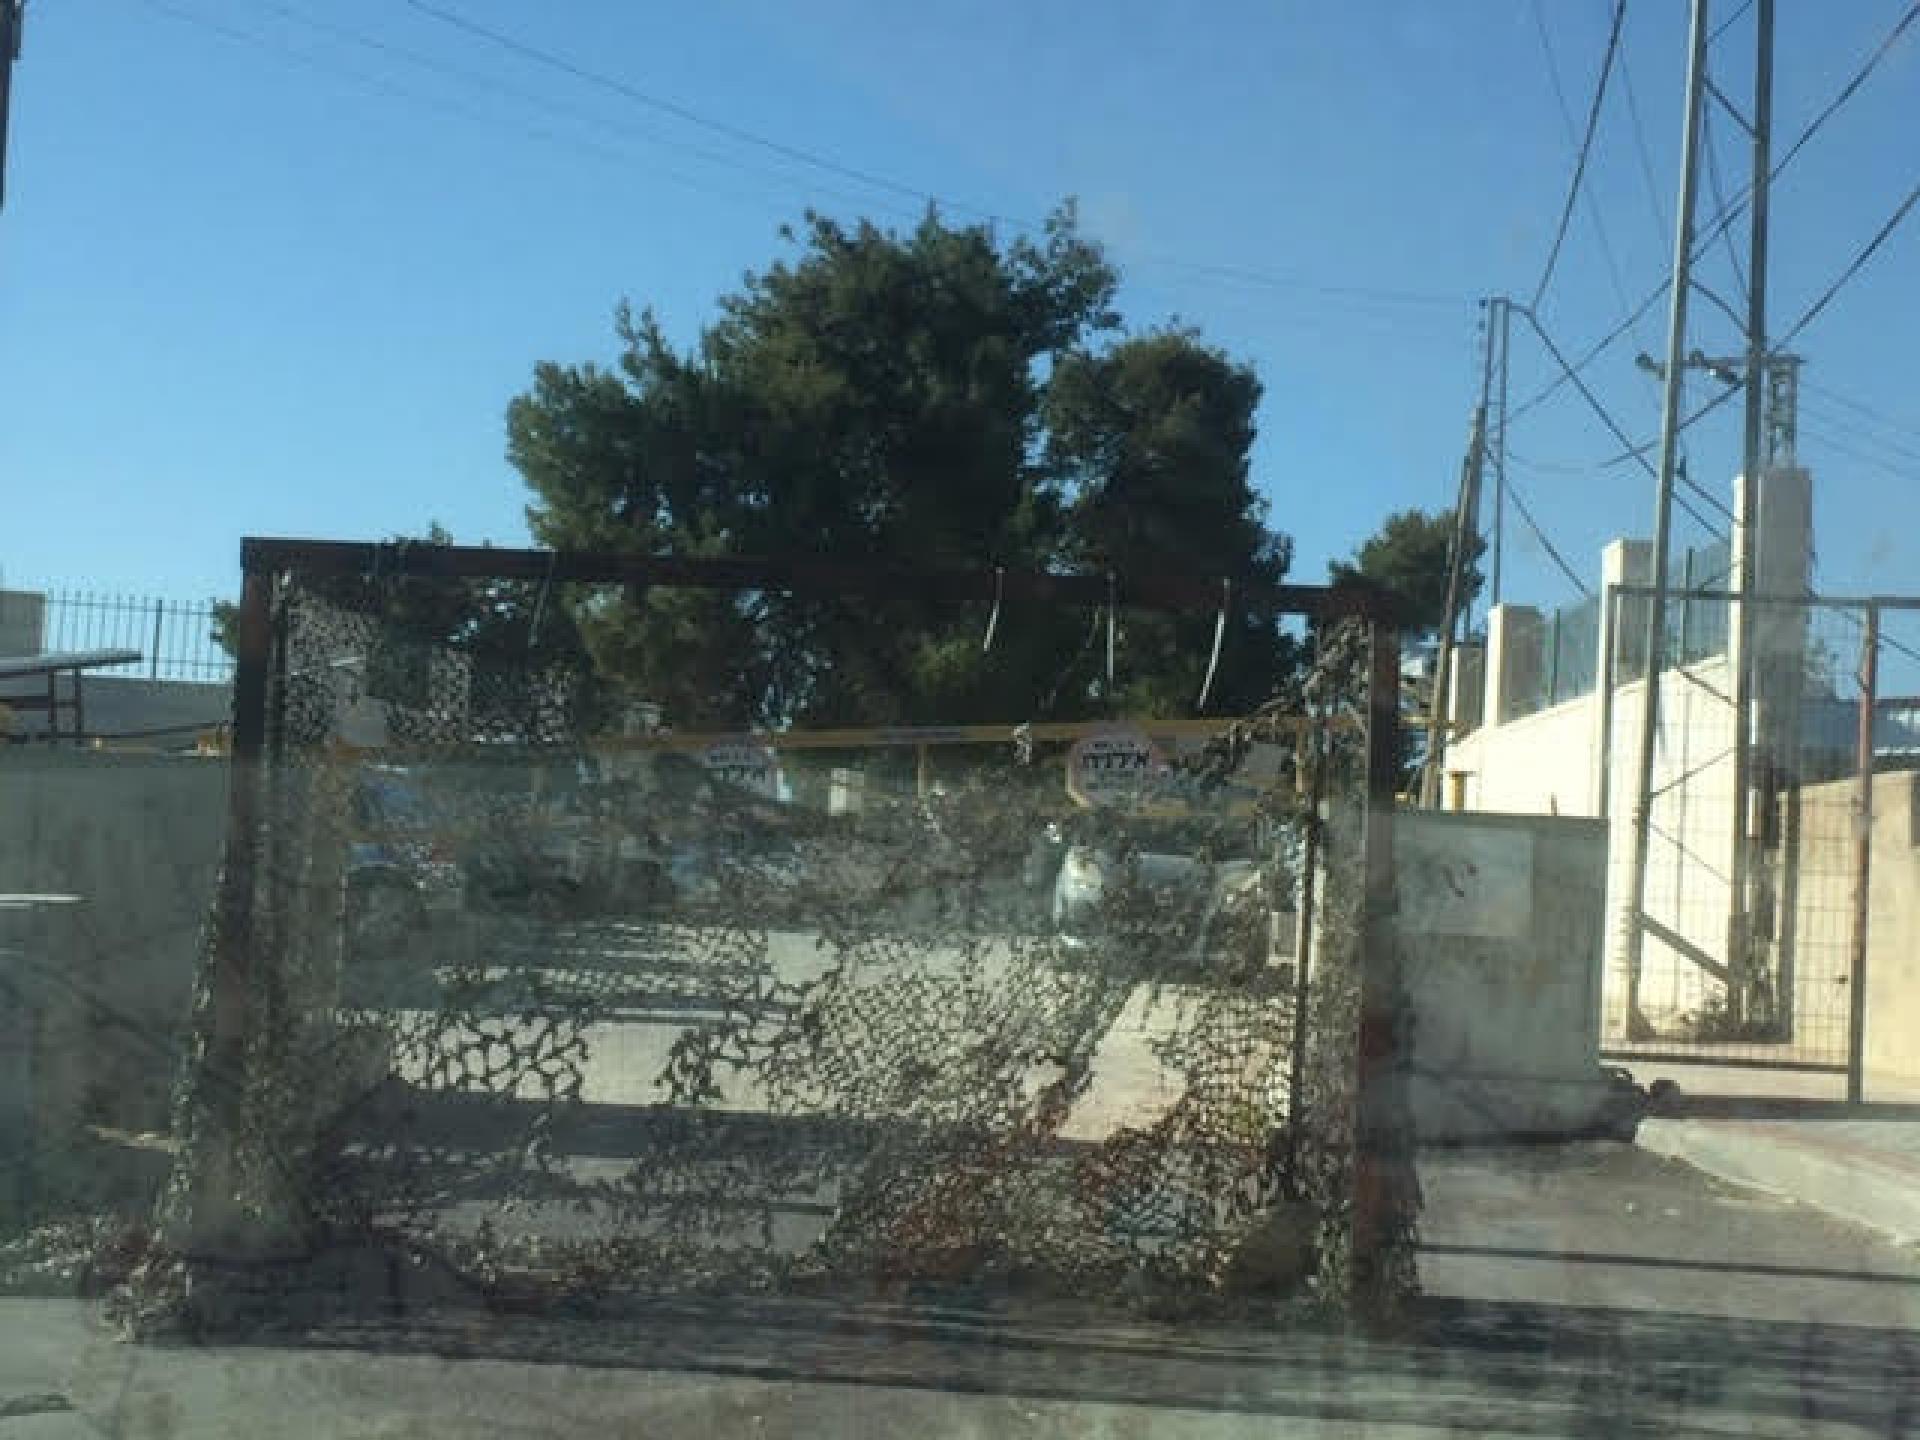 goalpost for soccer which the settlers places on the area in front of the House of Contention. This causes problems for the Palestinian traffic